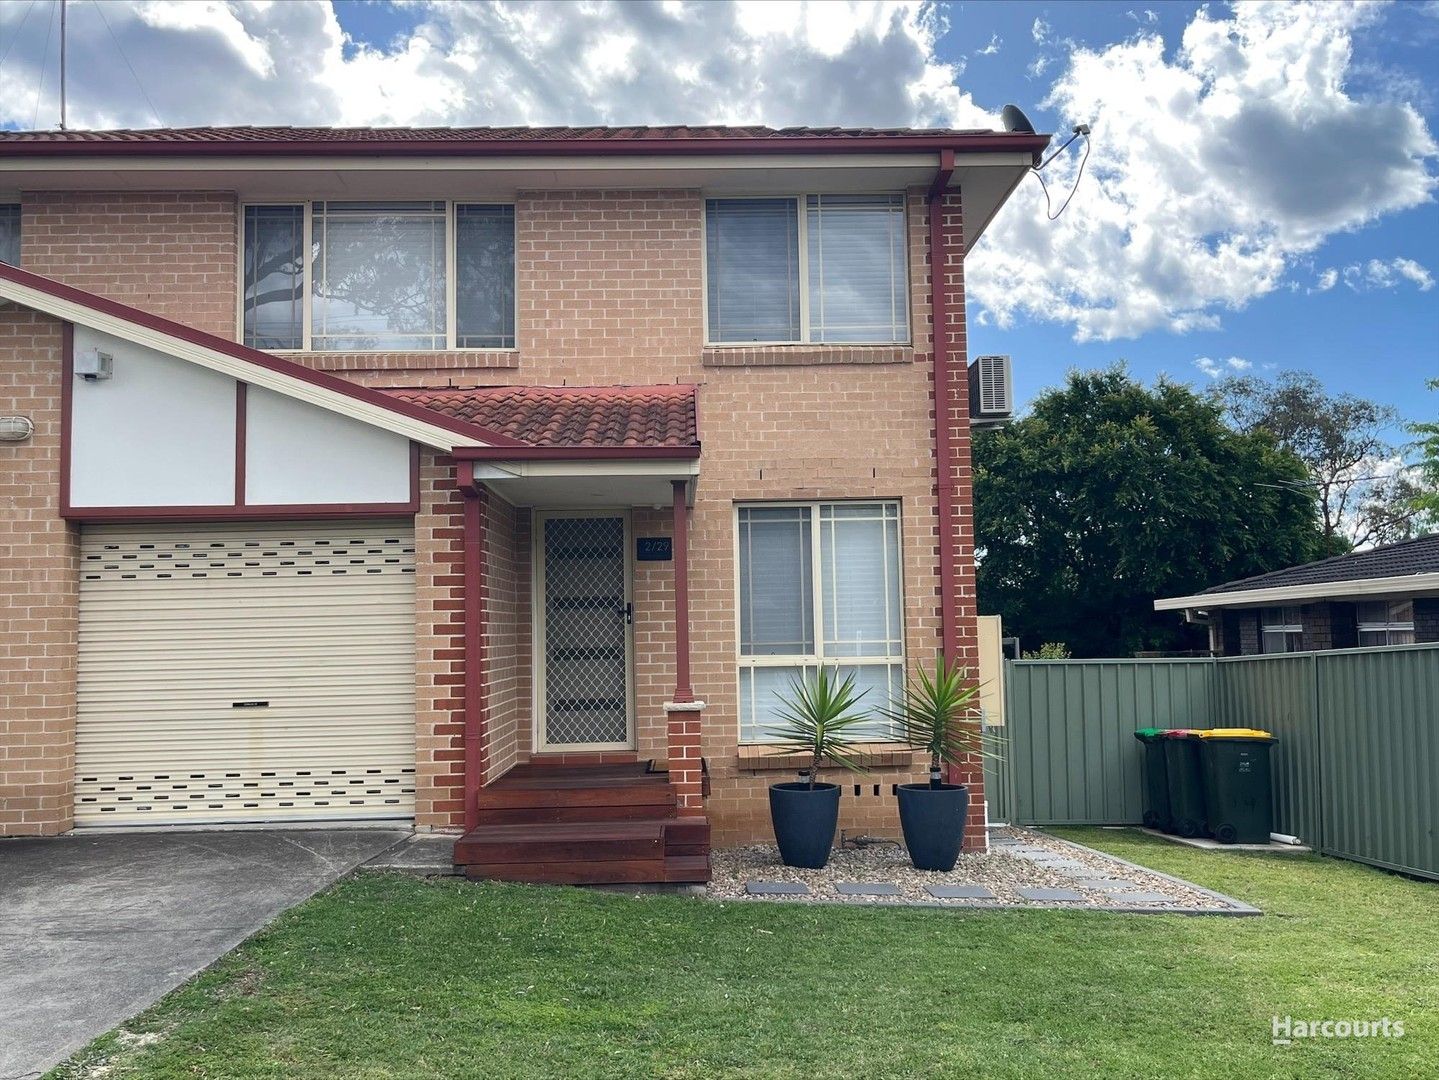 2 bedrooms House in 2/29 Kingsclare Street LEUMEAH NSW, 2560